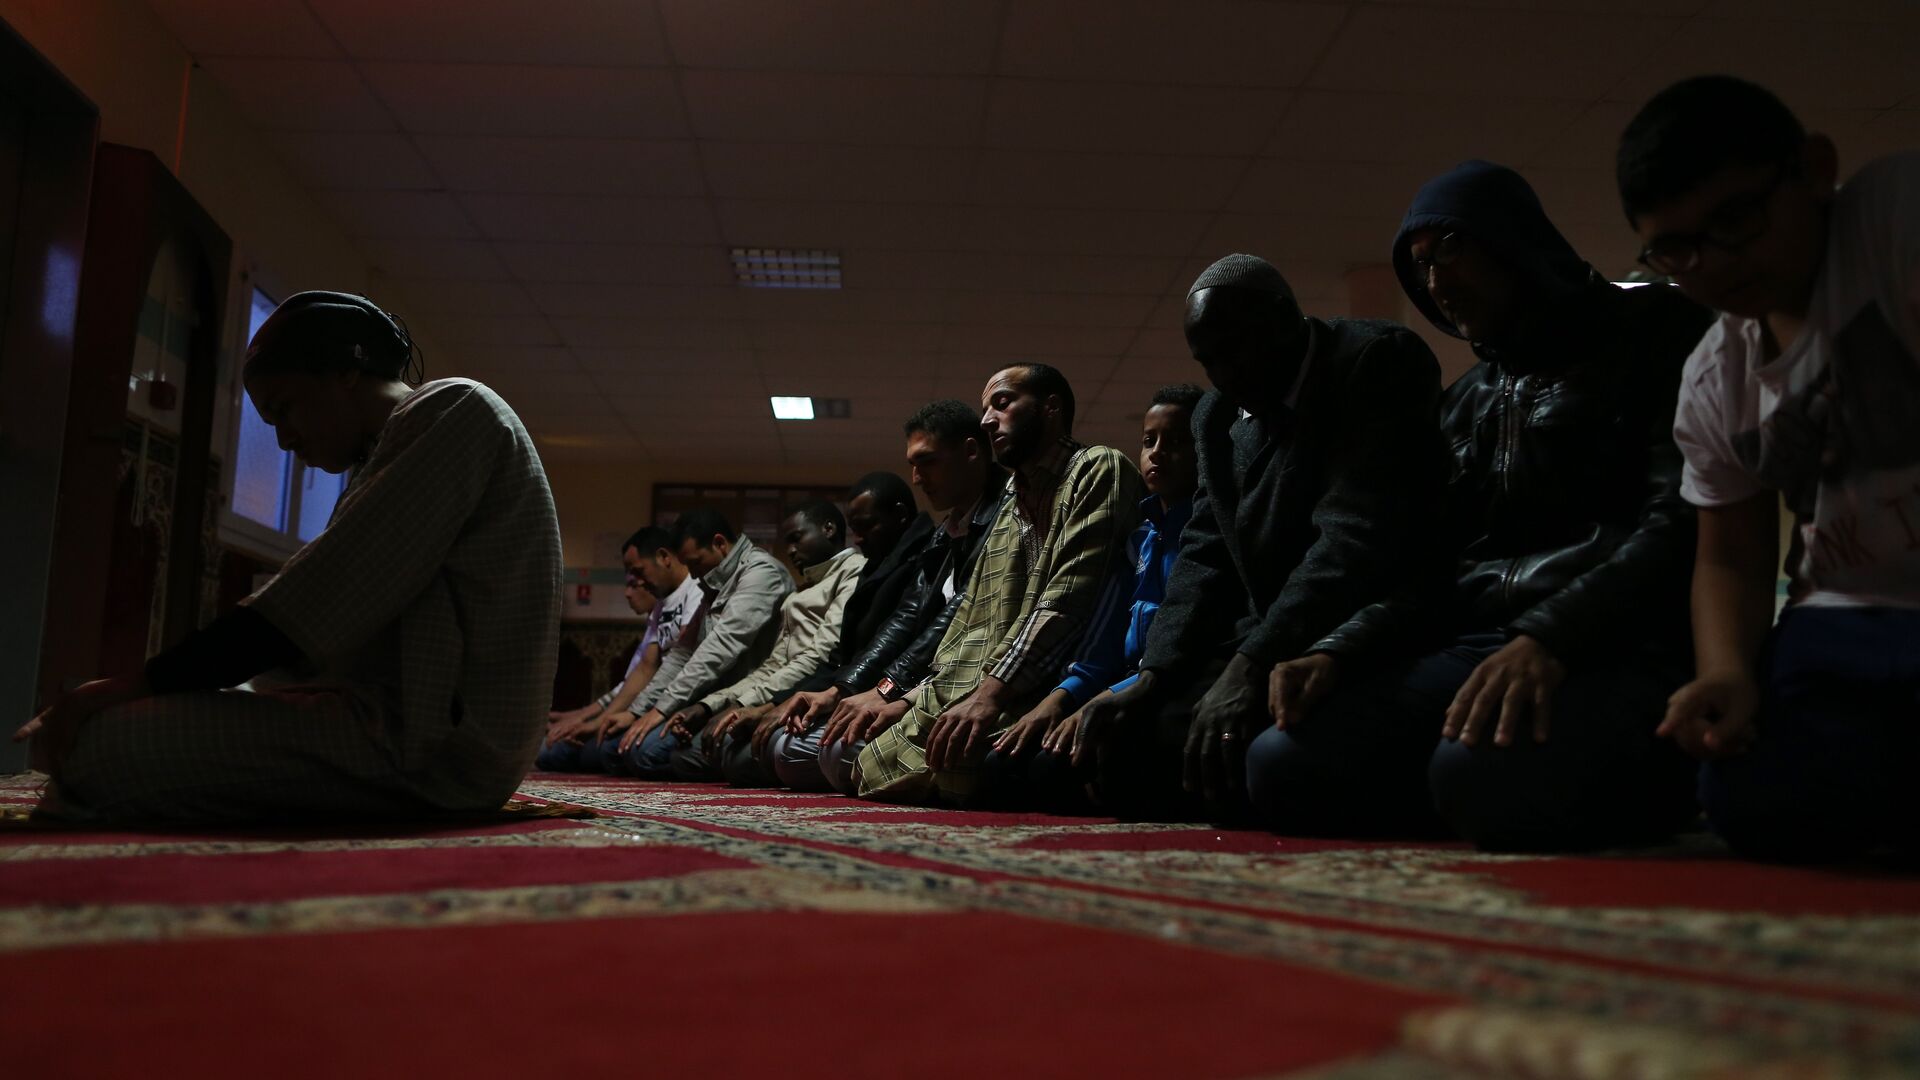 Muslims pray during the Muslim festivities of Eid al-Adha at the mosque in Cherbourg-Octeville, northwestern France on September 24, 2015. - Sputnik Afrique, 1920, 03.12.2021